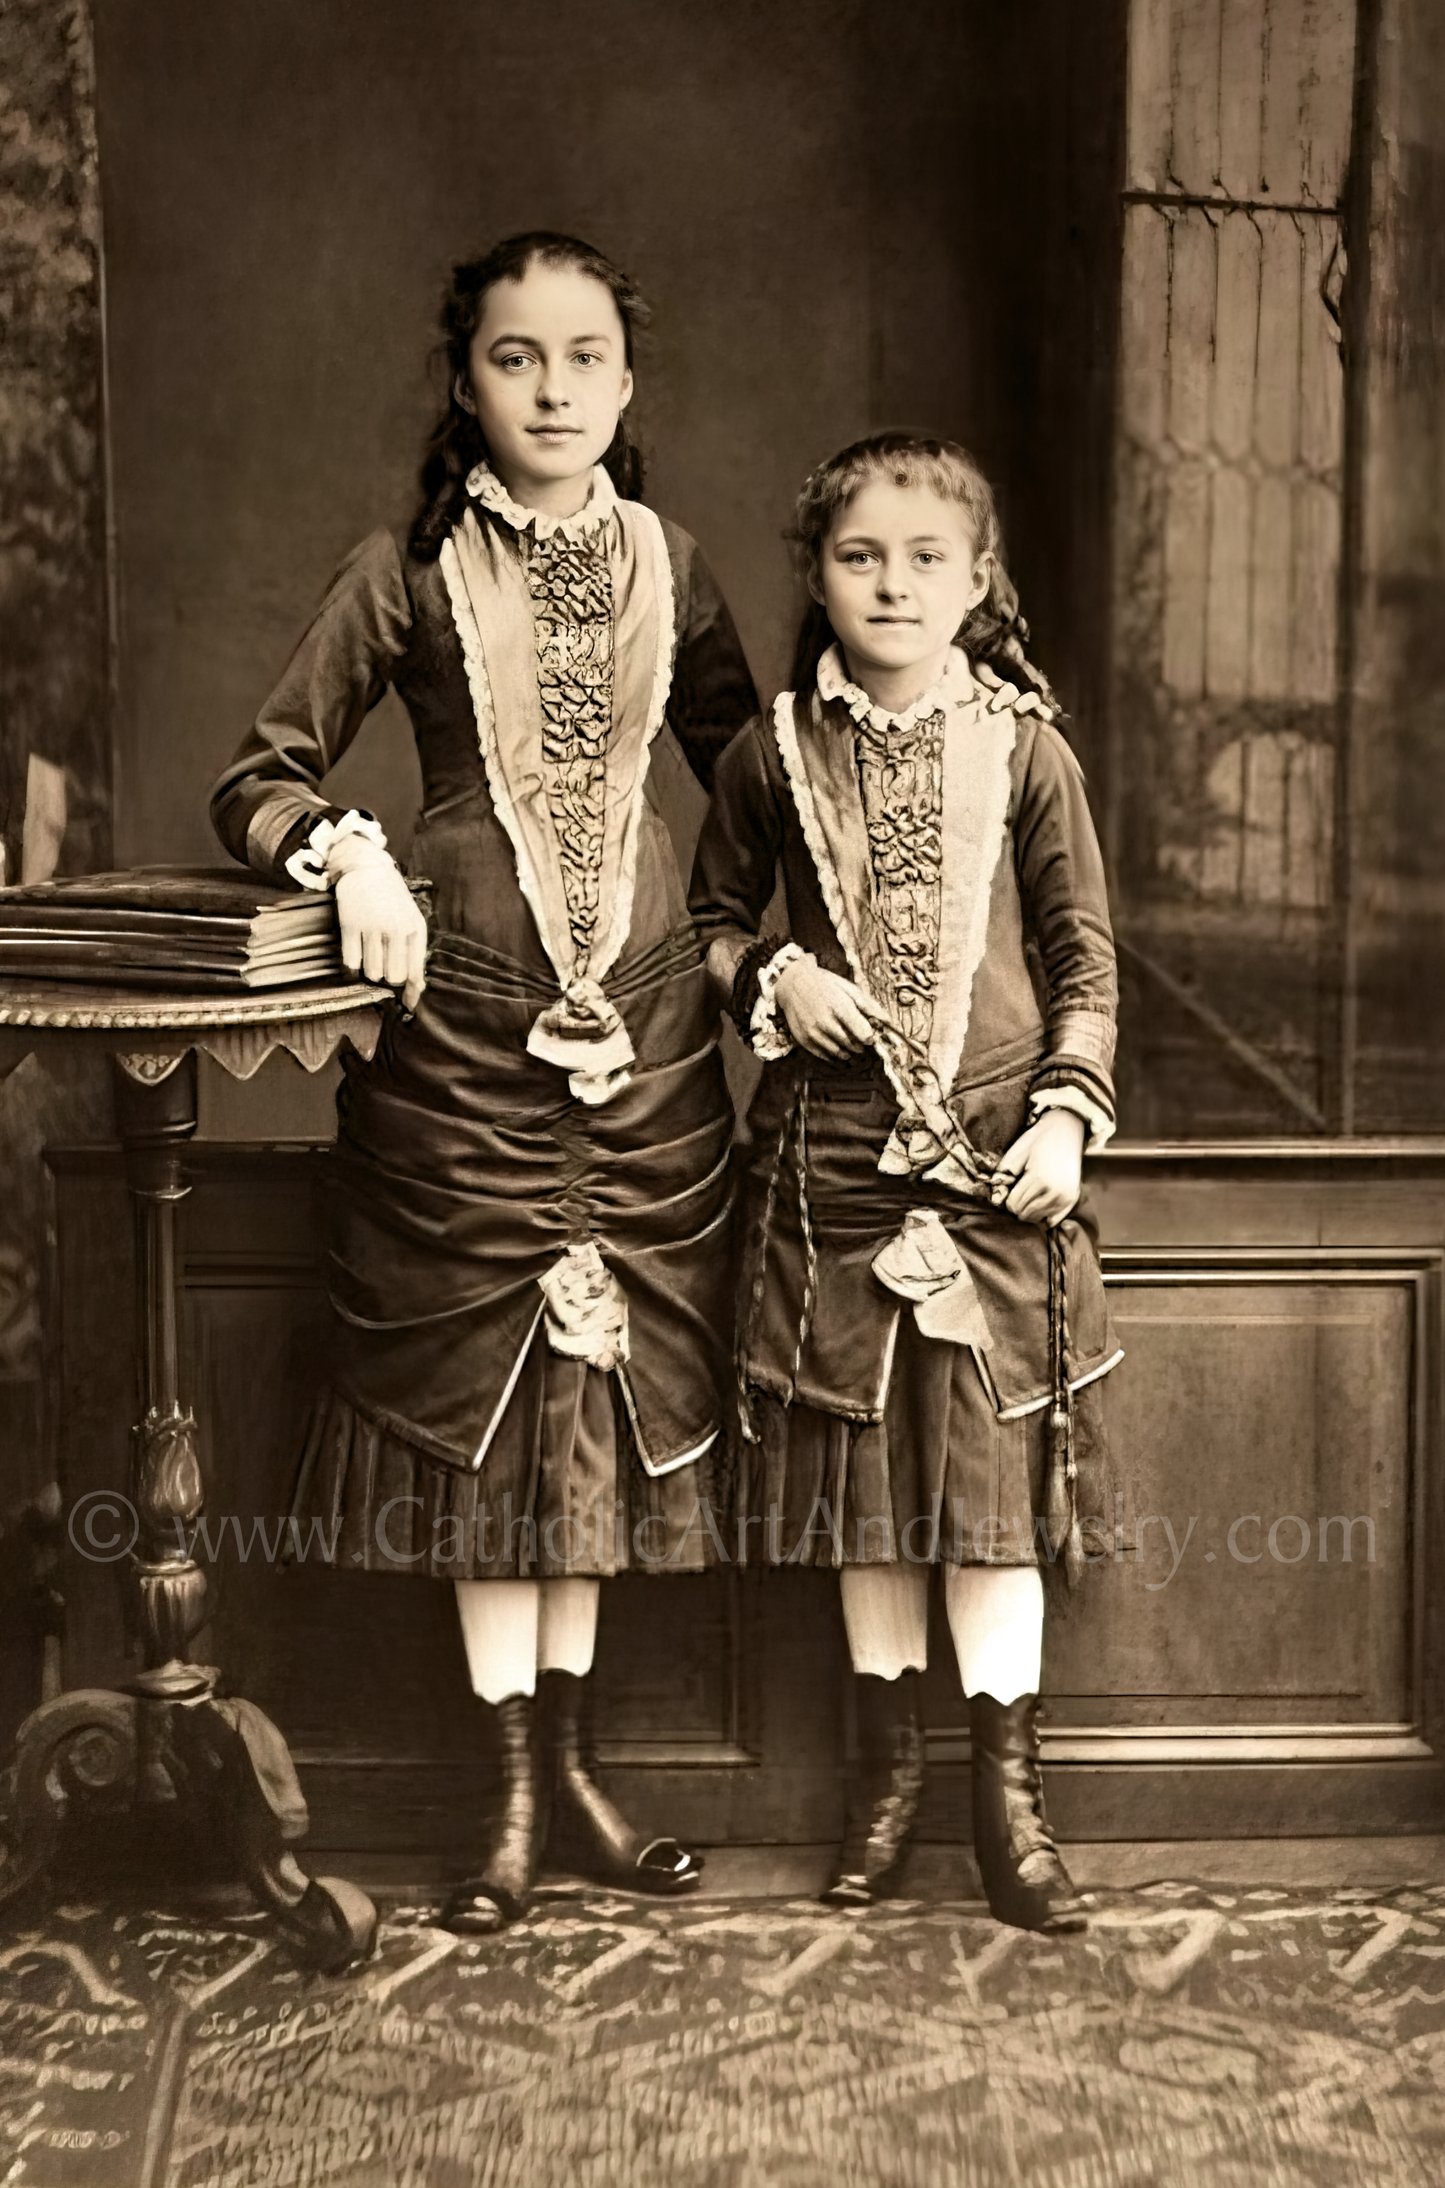 Celine and Therese Martin (St. Therese of Lisieux with her older sister) – 8.5x11"